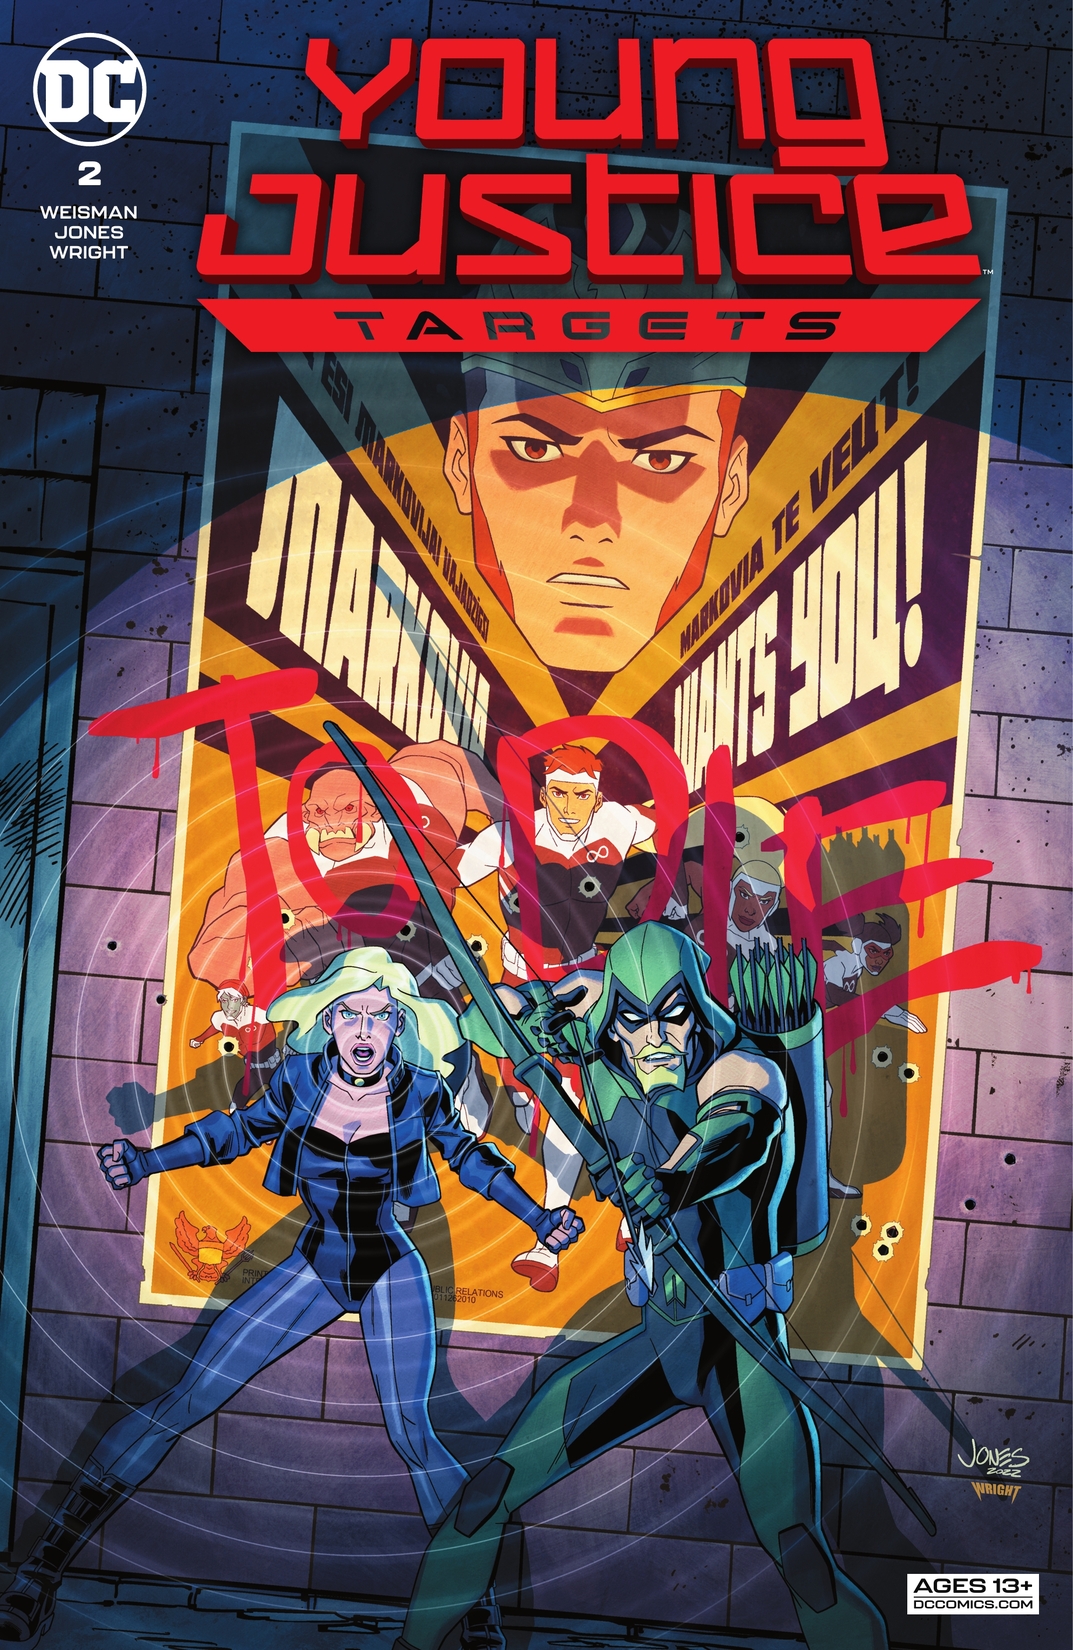 Young Justice: Targets Director's Cut #2 preview images